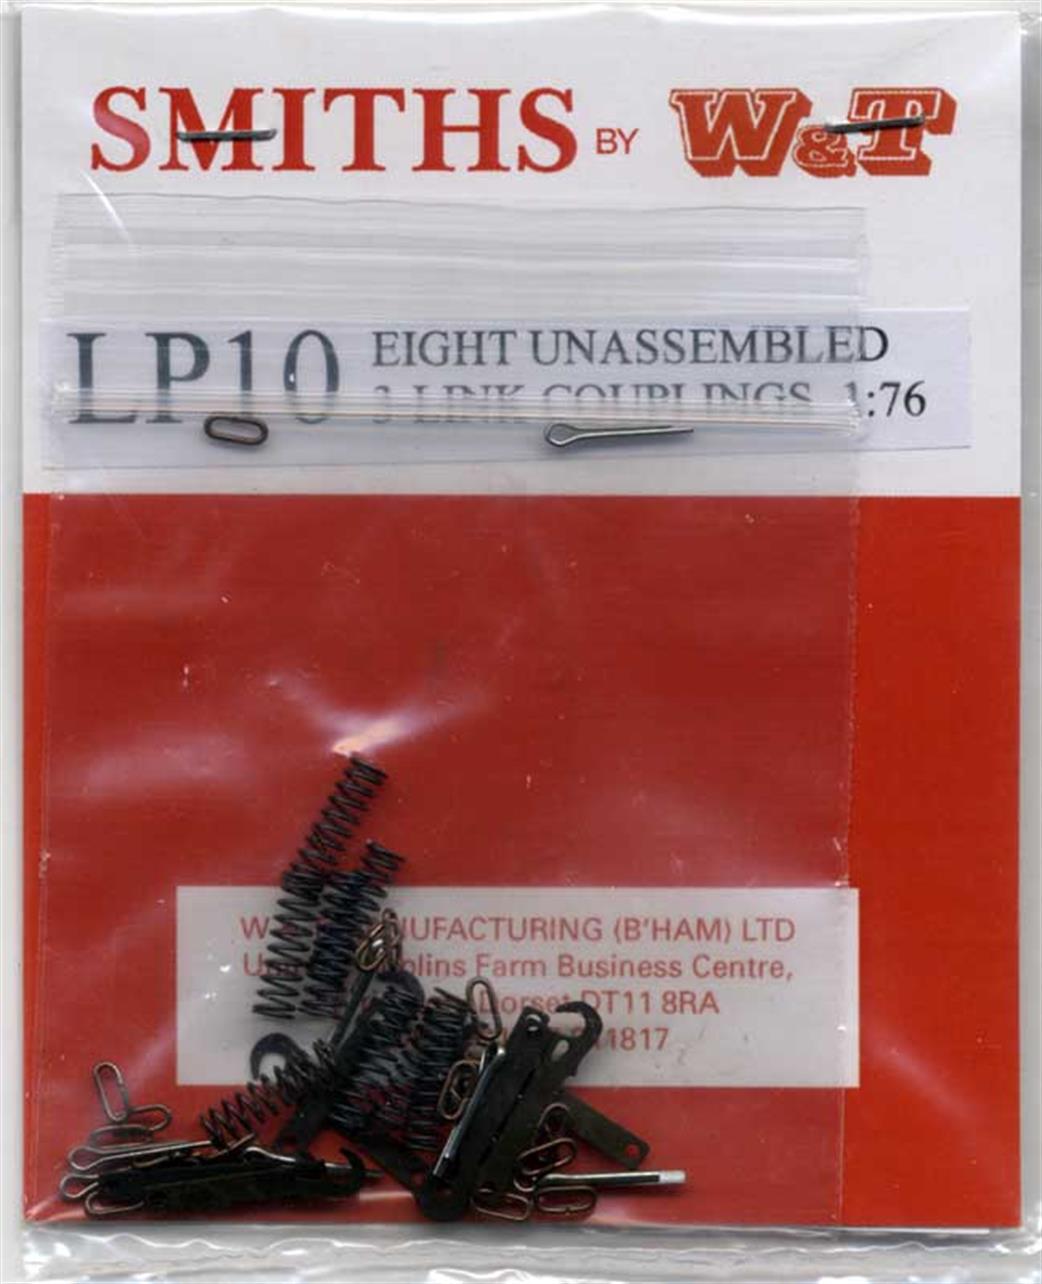 Smiths by W&T OO LP10 Short Length 3-Link Couplings 4 Pairs Kit